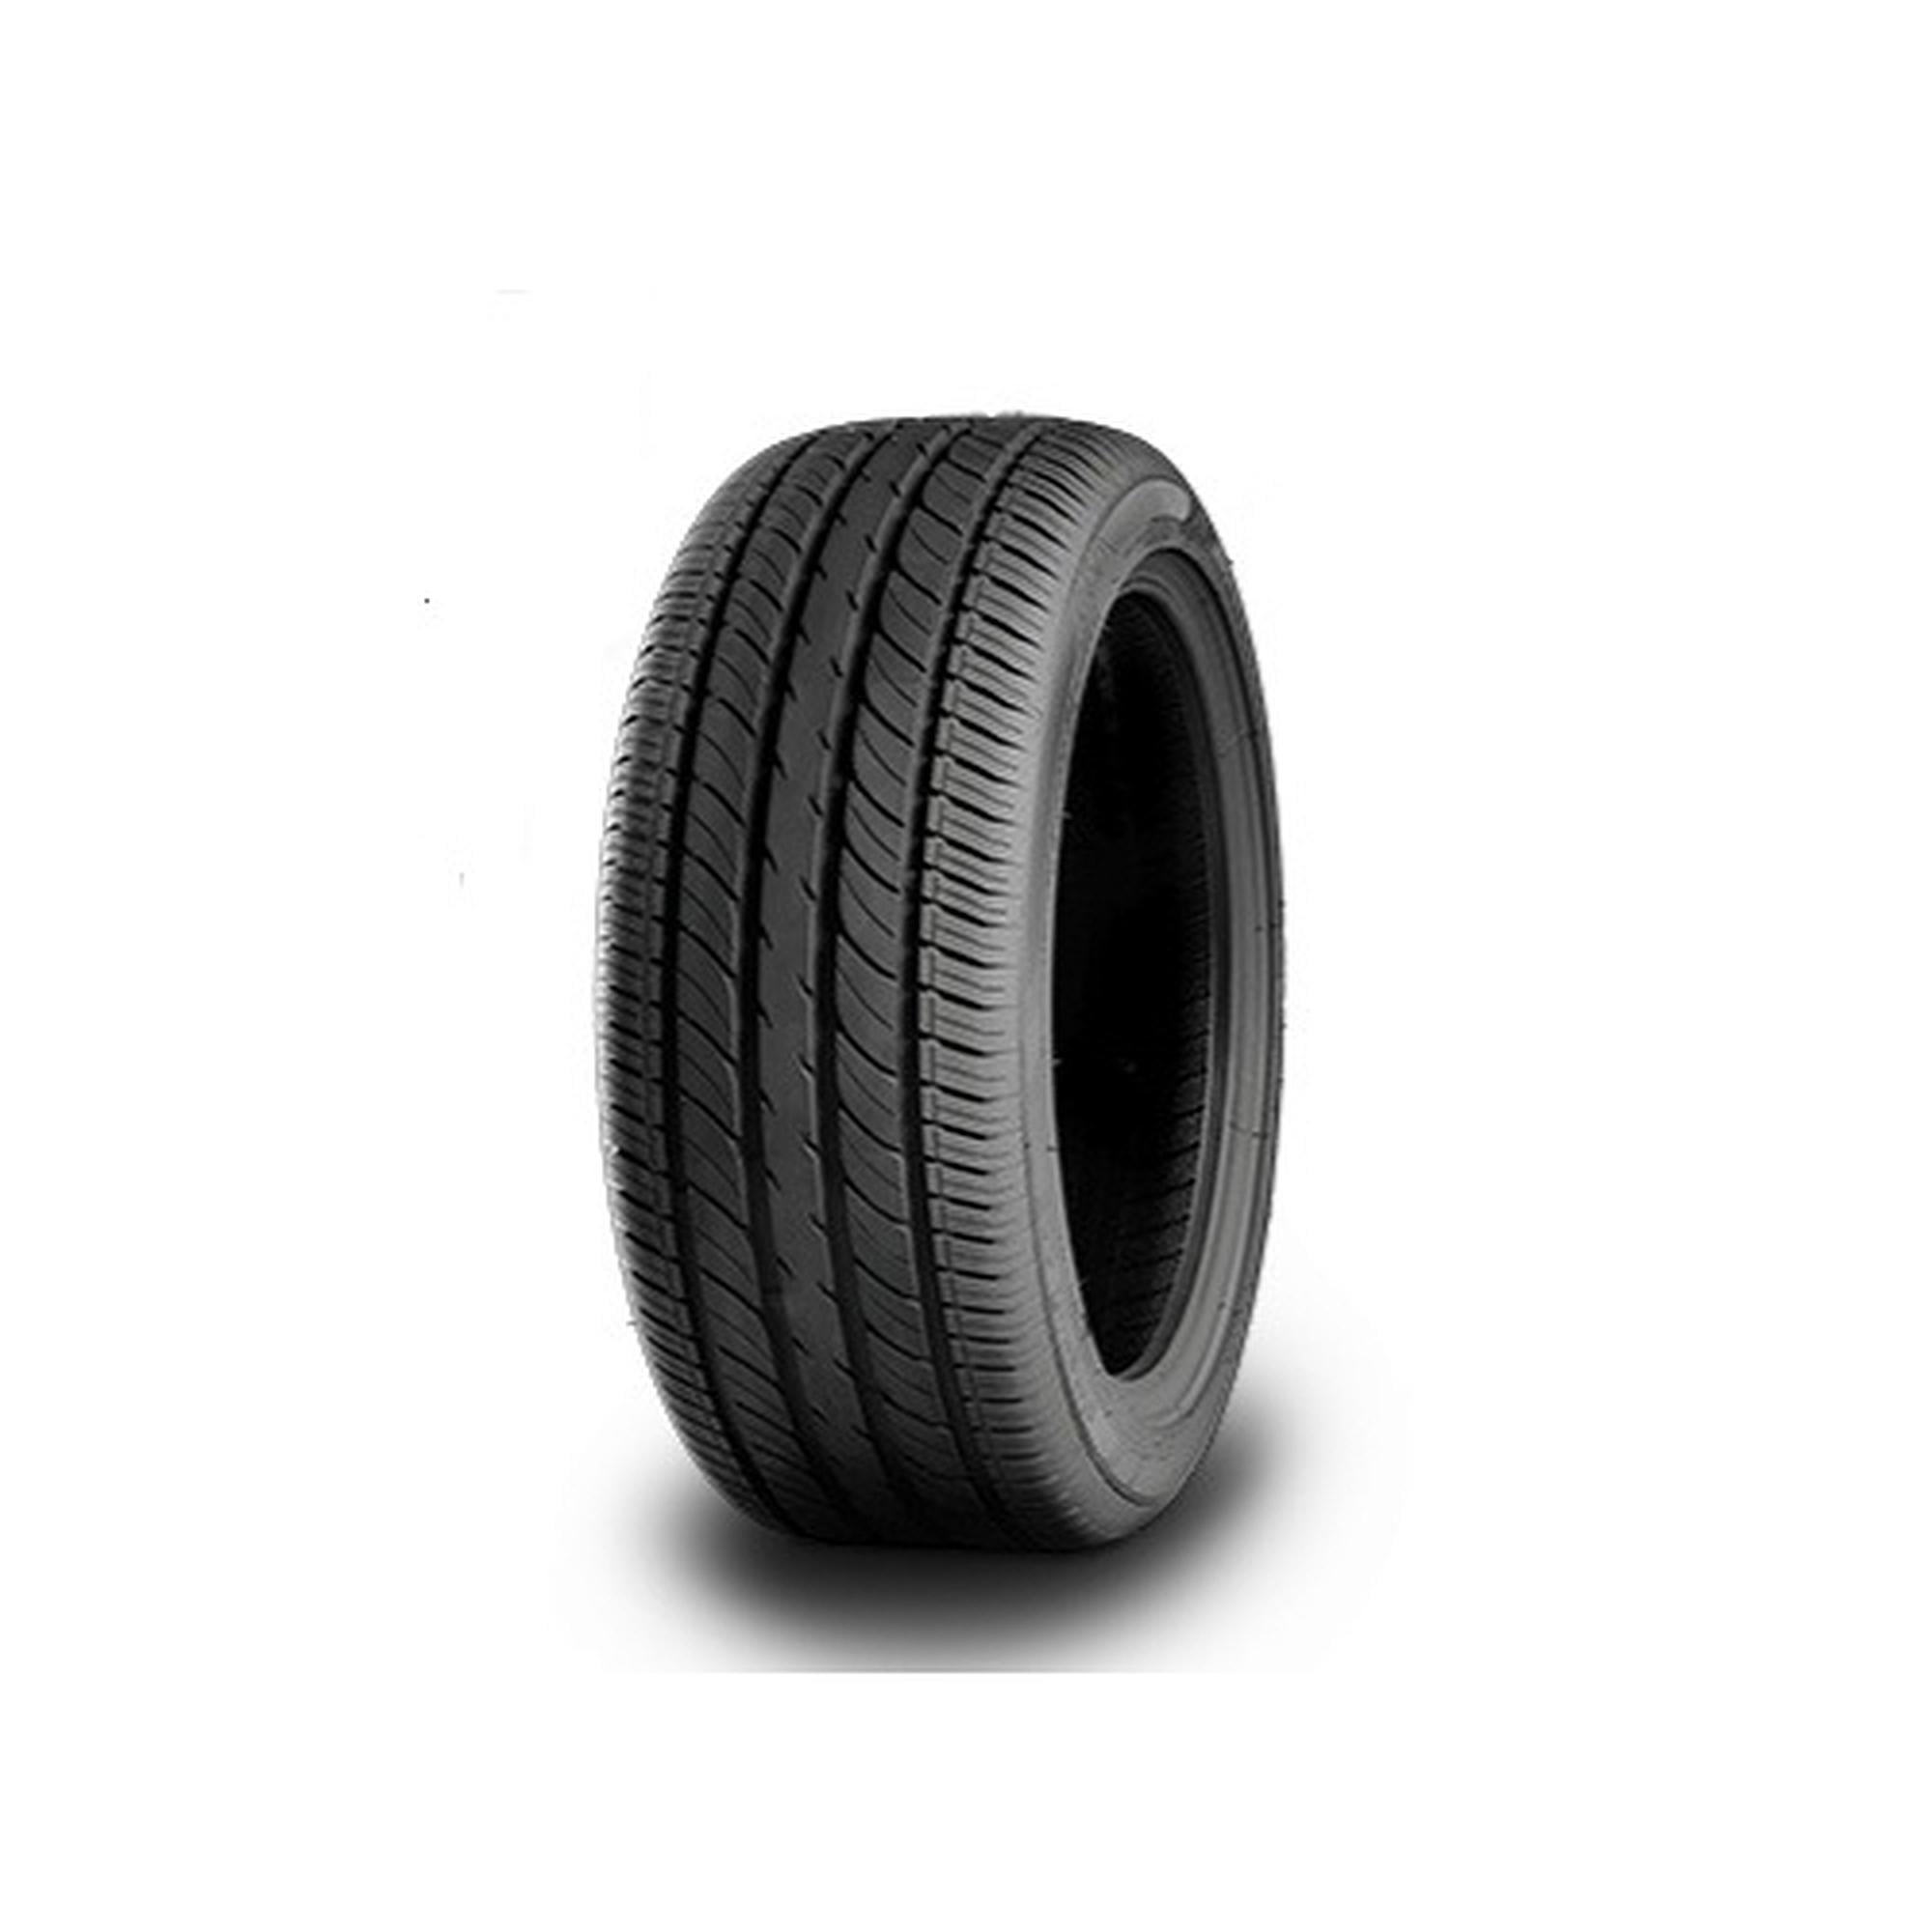 Dynamic Summer Passenger 79T Eco Tire 165/70R13 Waterfall